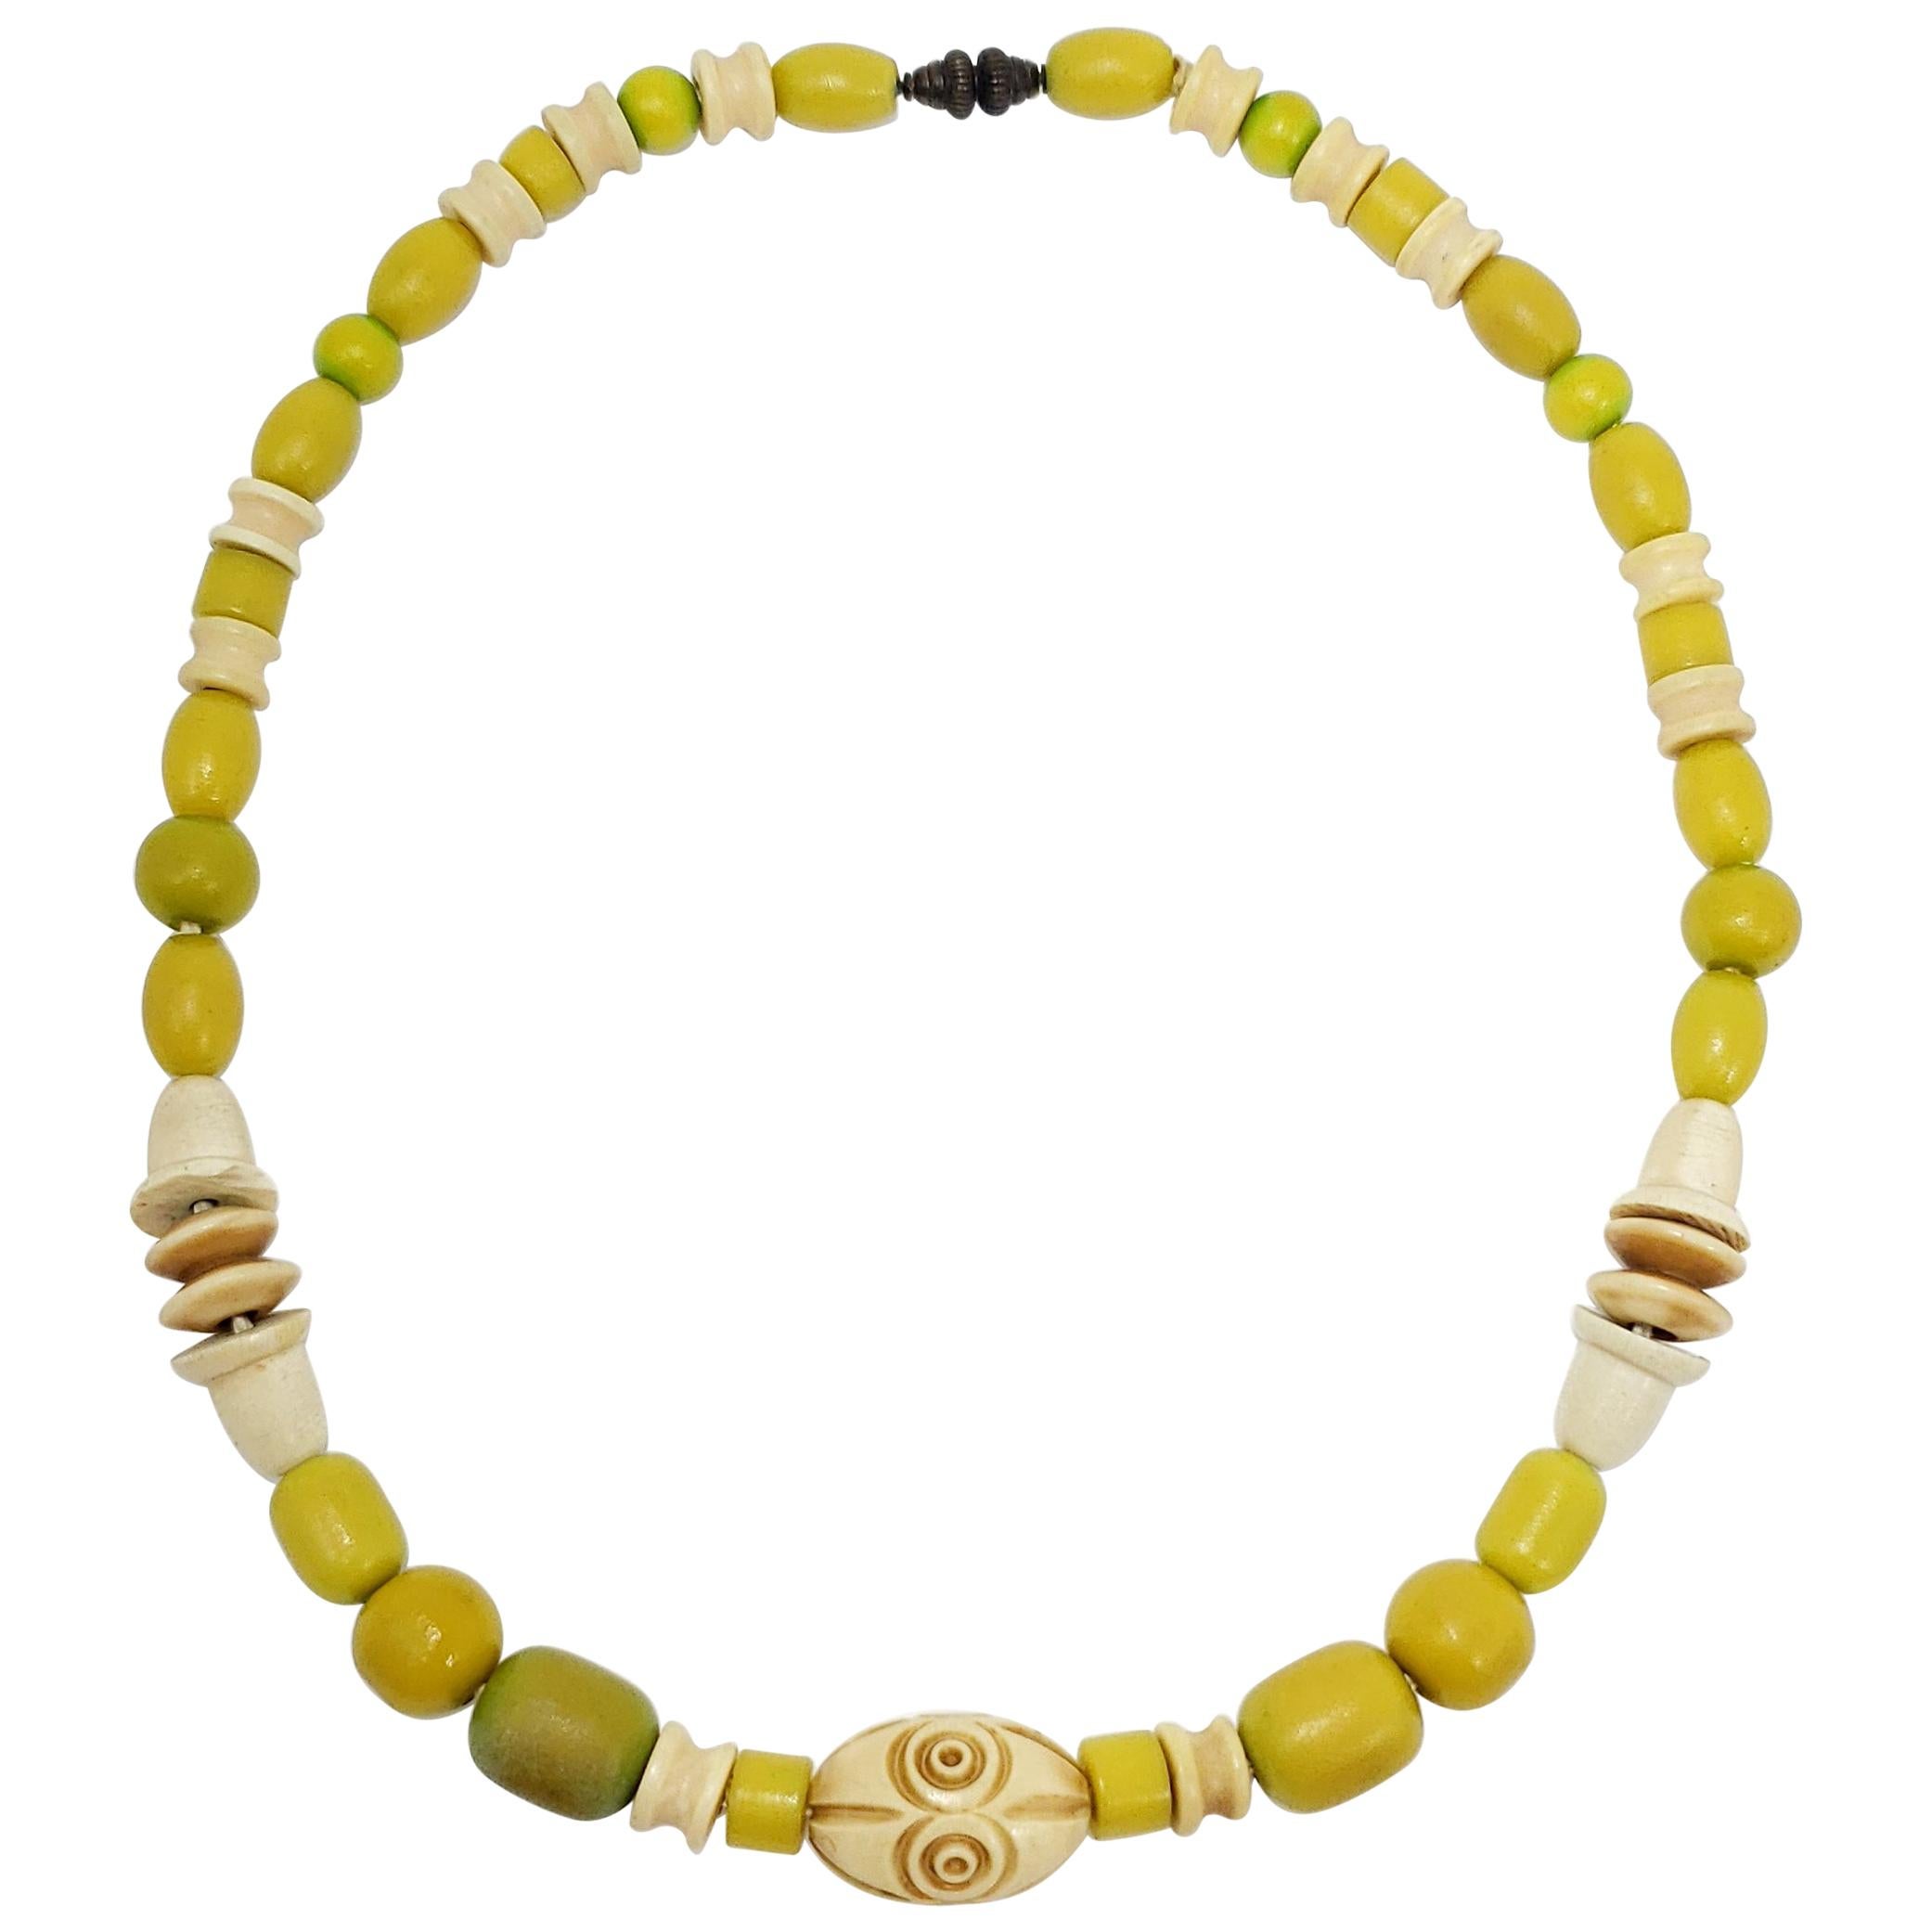 Apple Green and Cream Colored Carved Bakelite Bead Necklace, Brass Tone Clasp For Sale